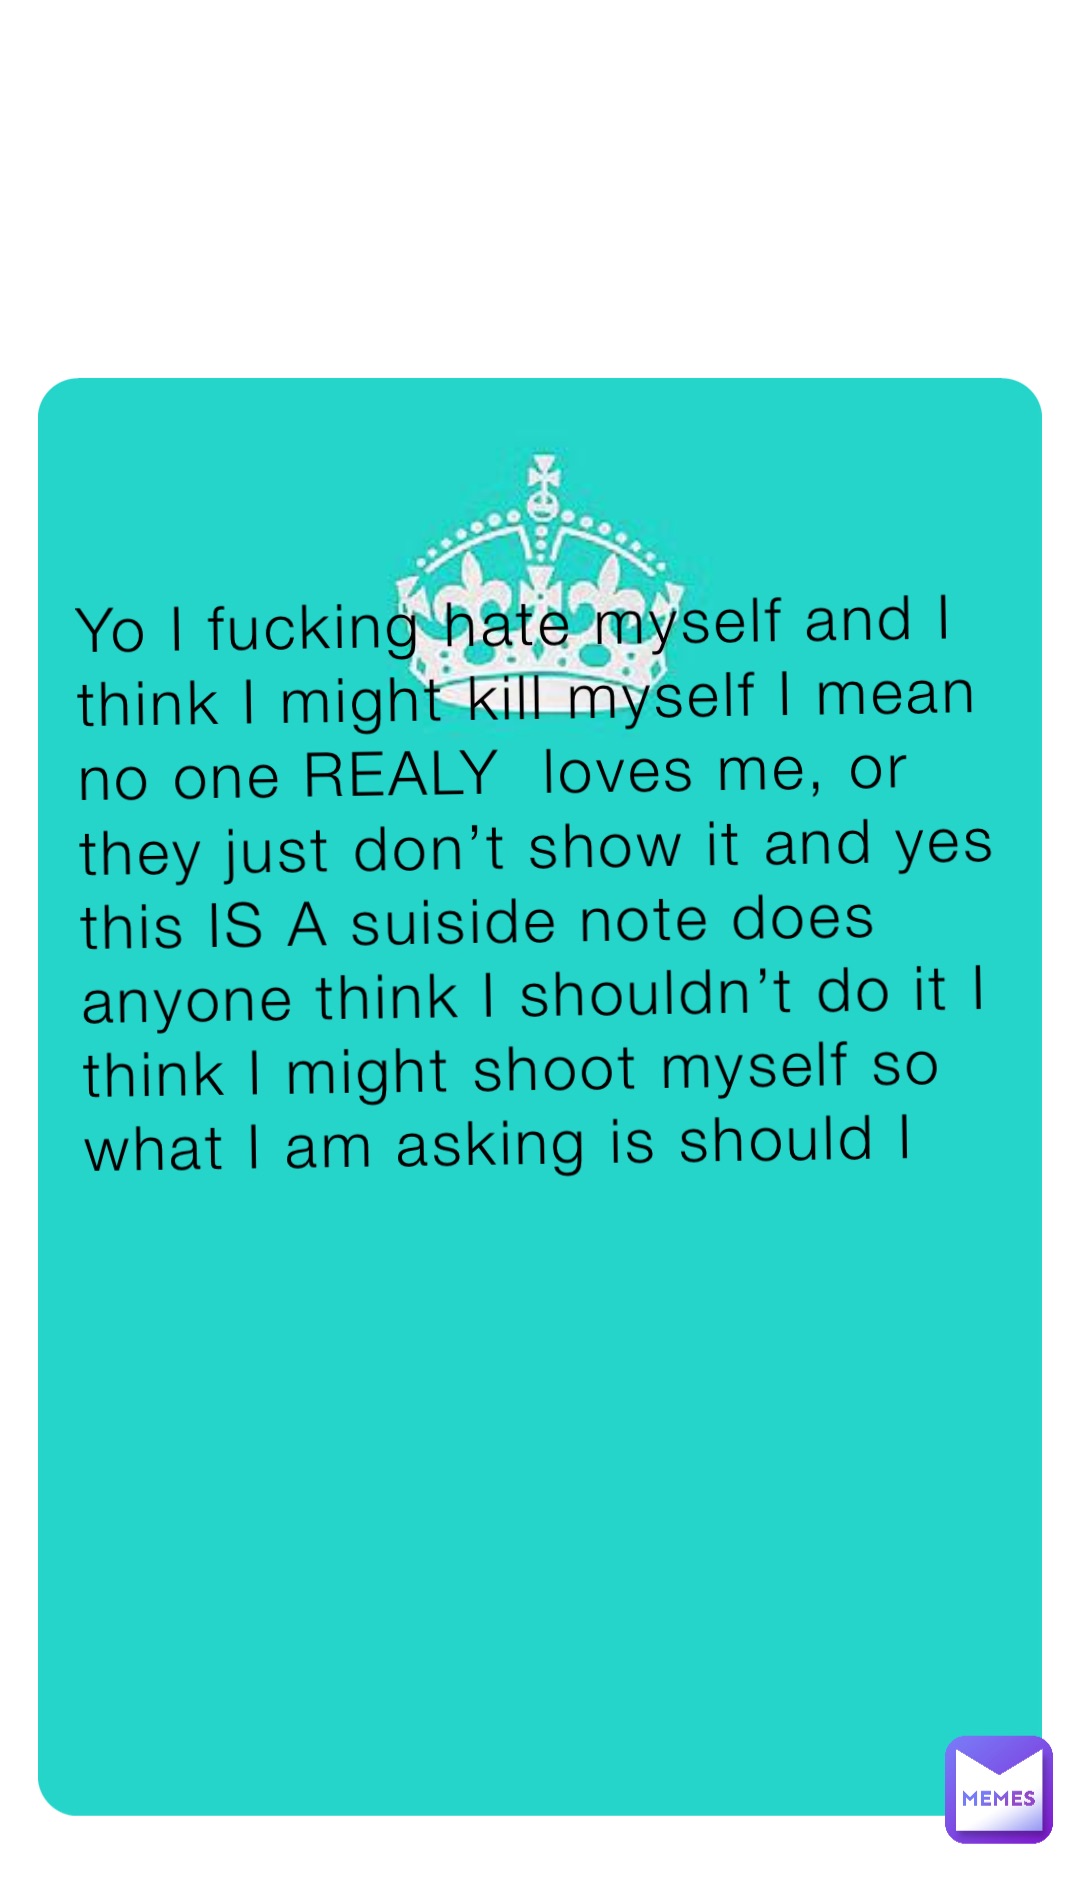 Yo I fucking hate myself and I think I might kill myself I mean no one REALY  loves me, or they just don’t show it and yes this IS A suiside note does anyone think I shouldn’t do it I think I might shoot myself so what I am asking is should I